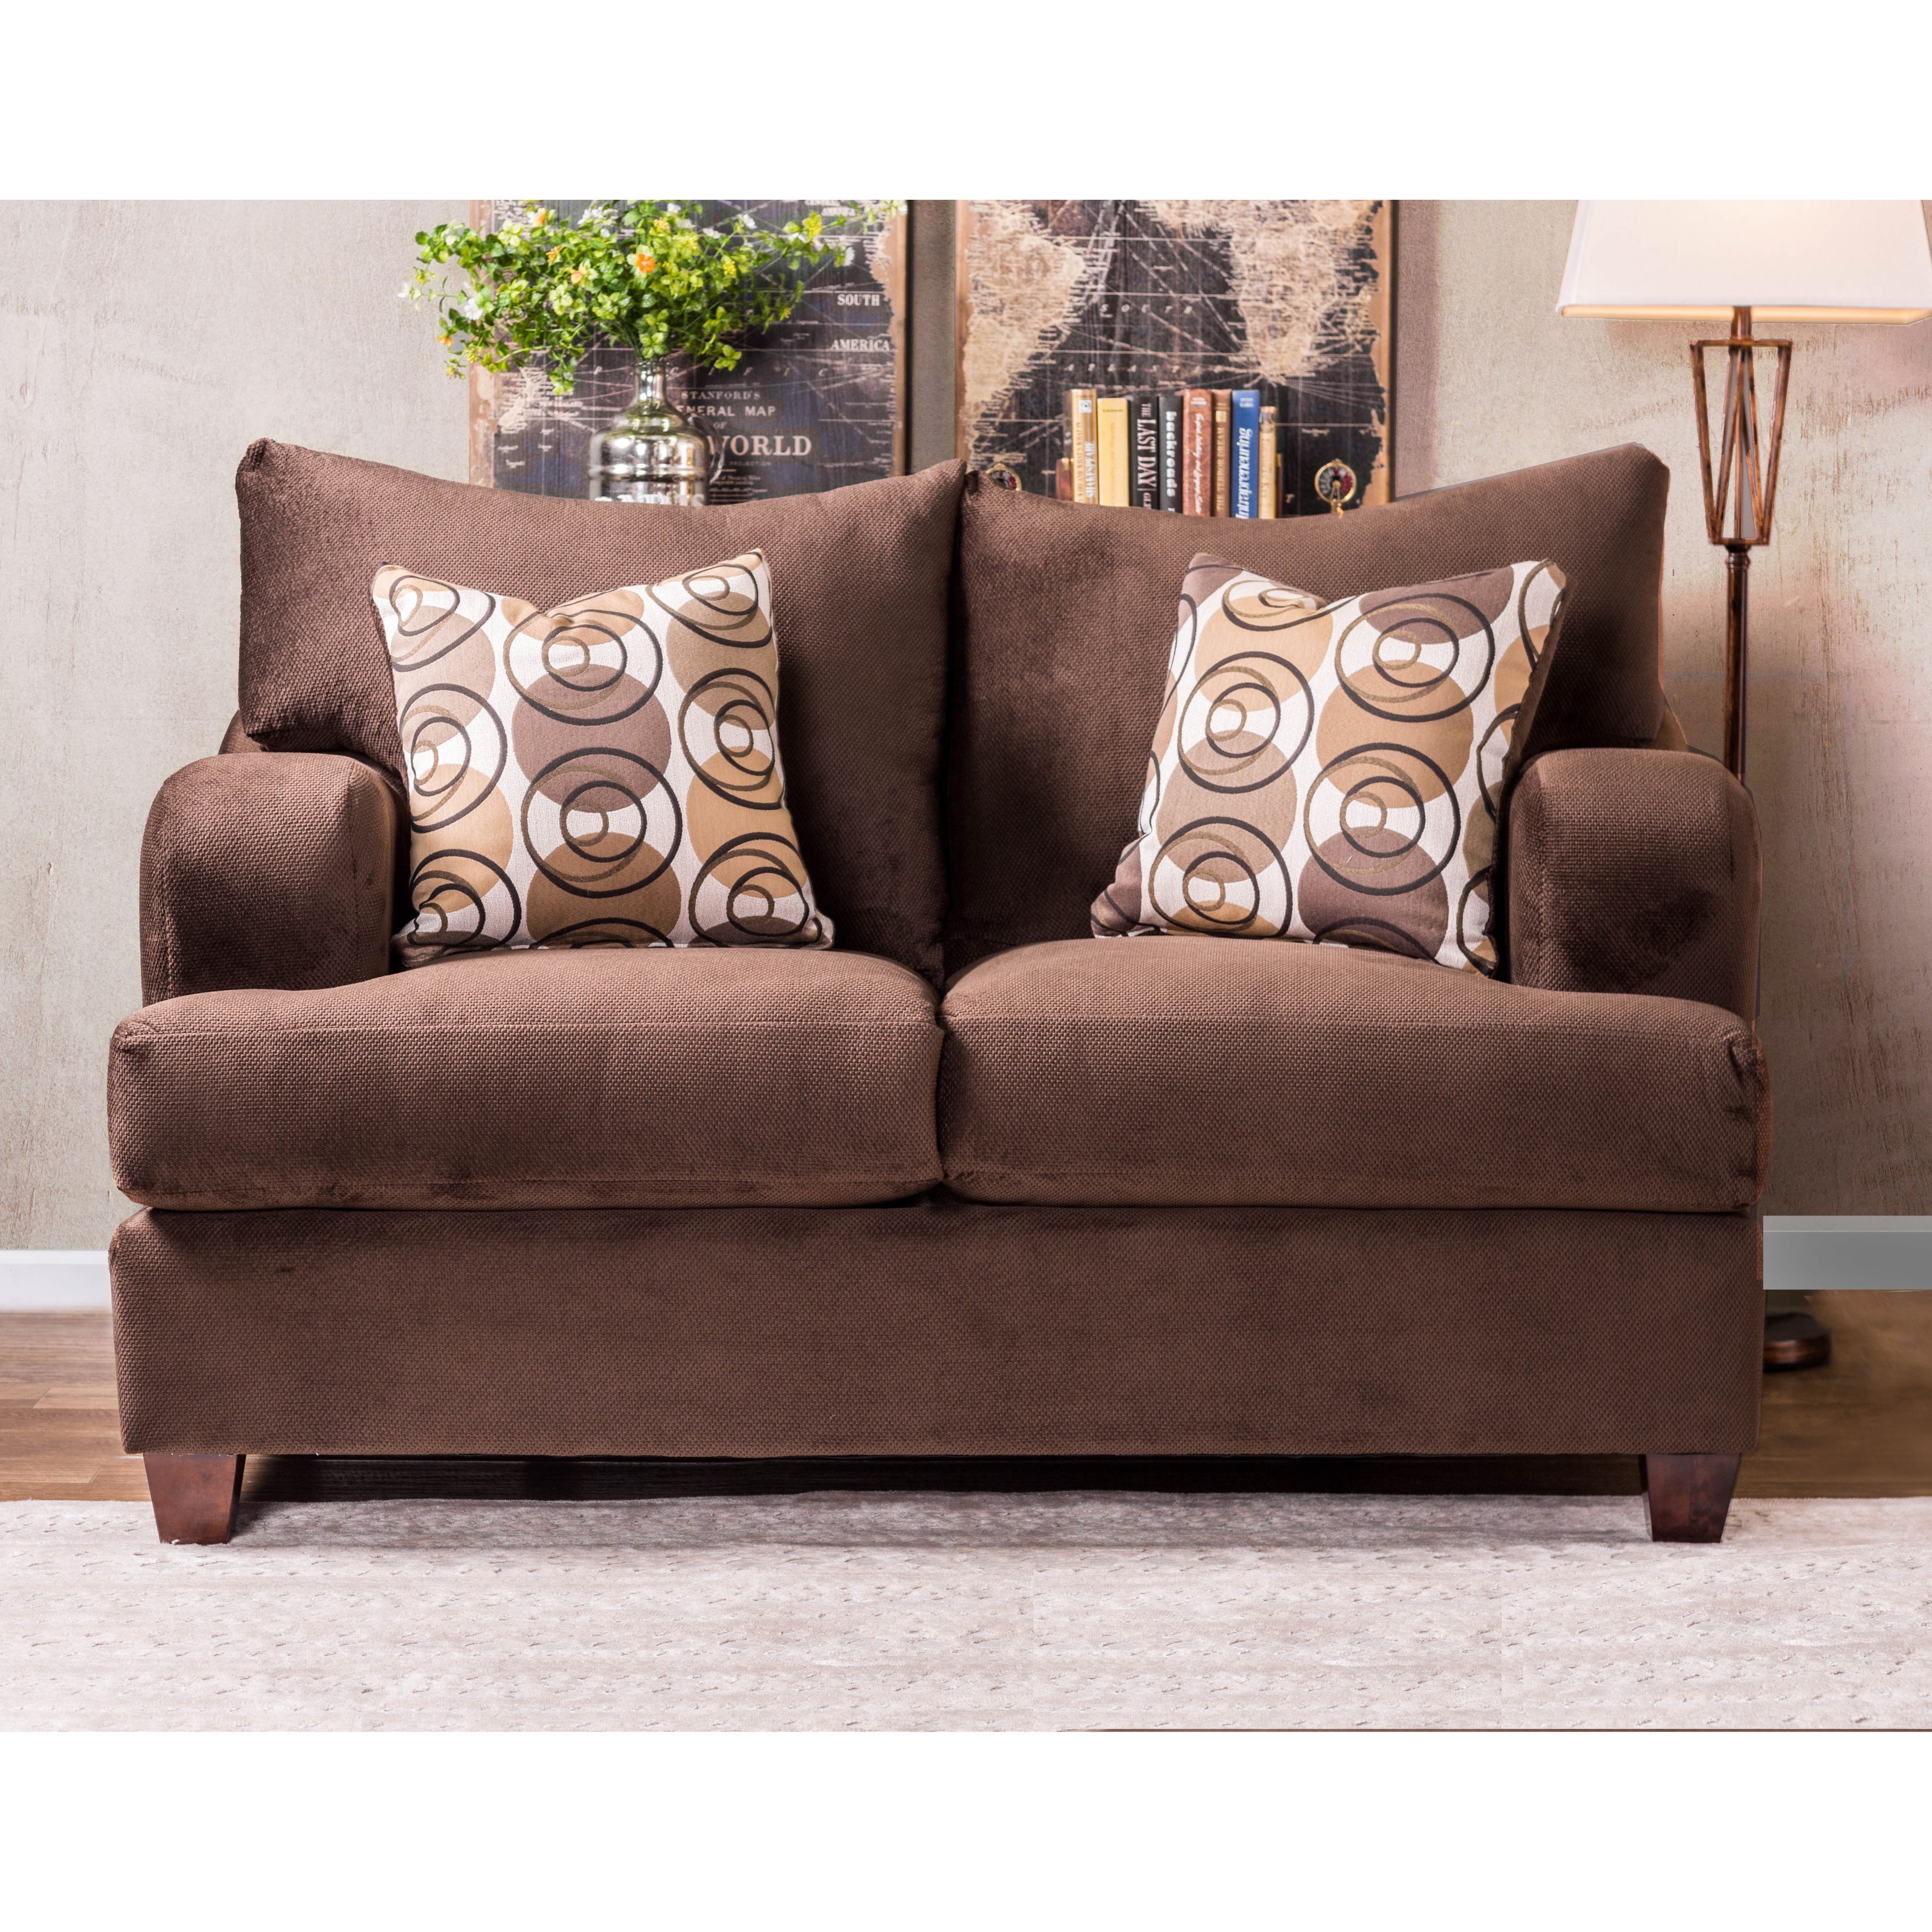 Furniture of America Tally 2-Piece Brown Wood and Plaid Sofa and Loveseat  Set 